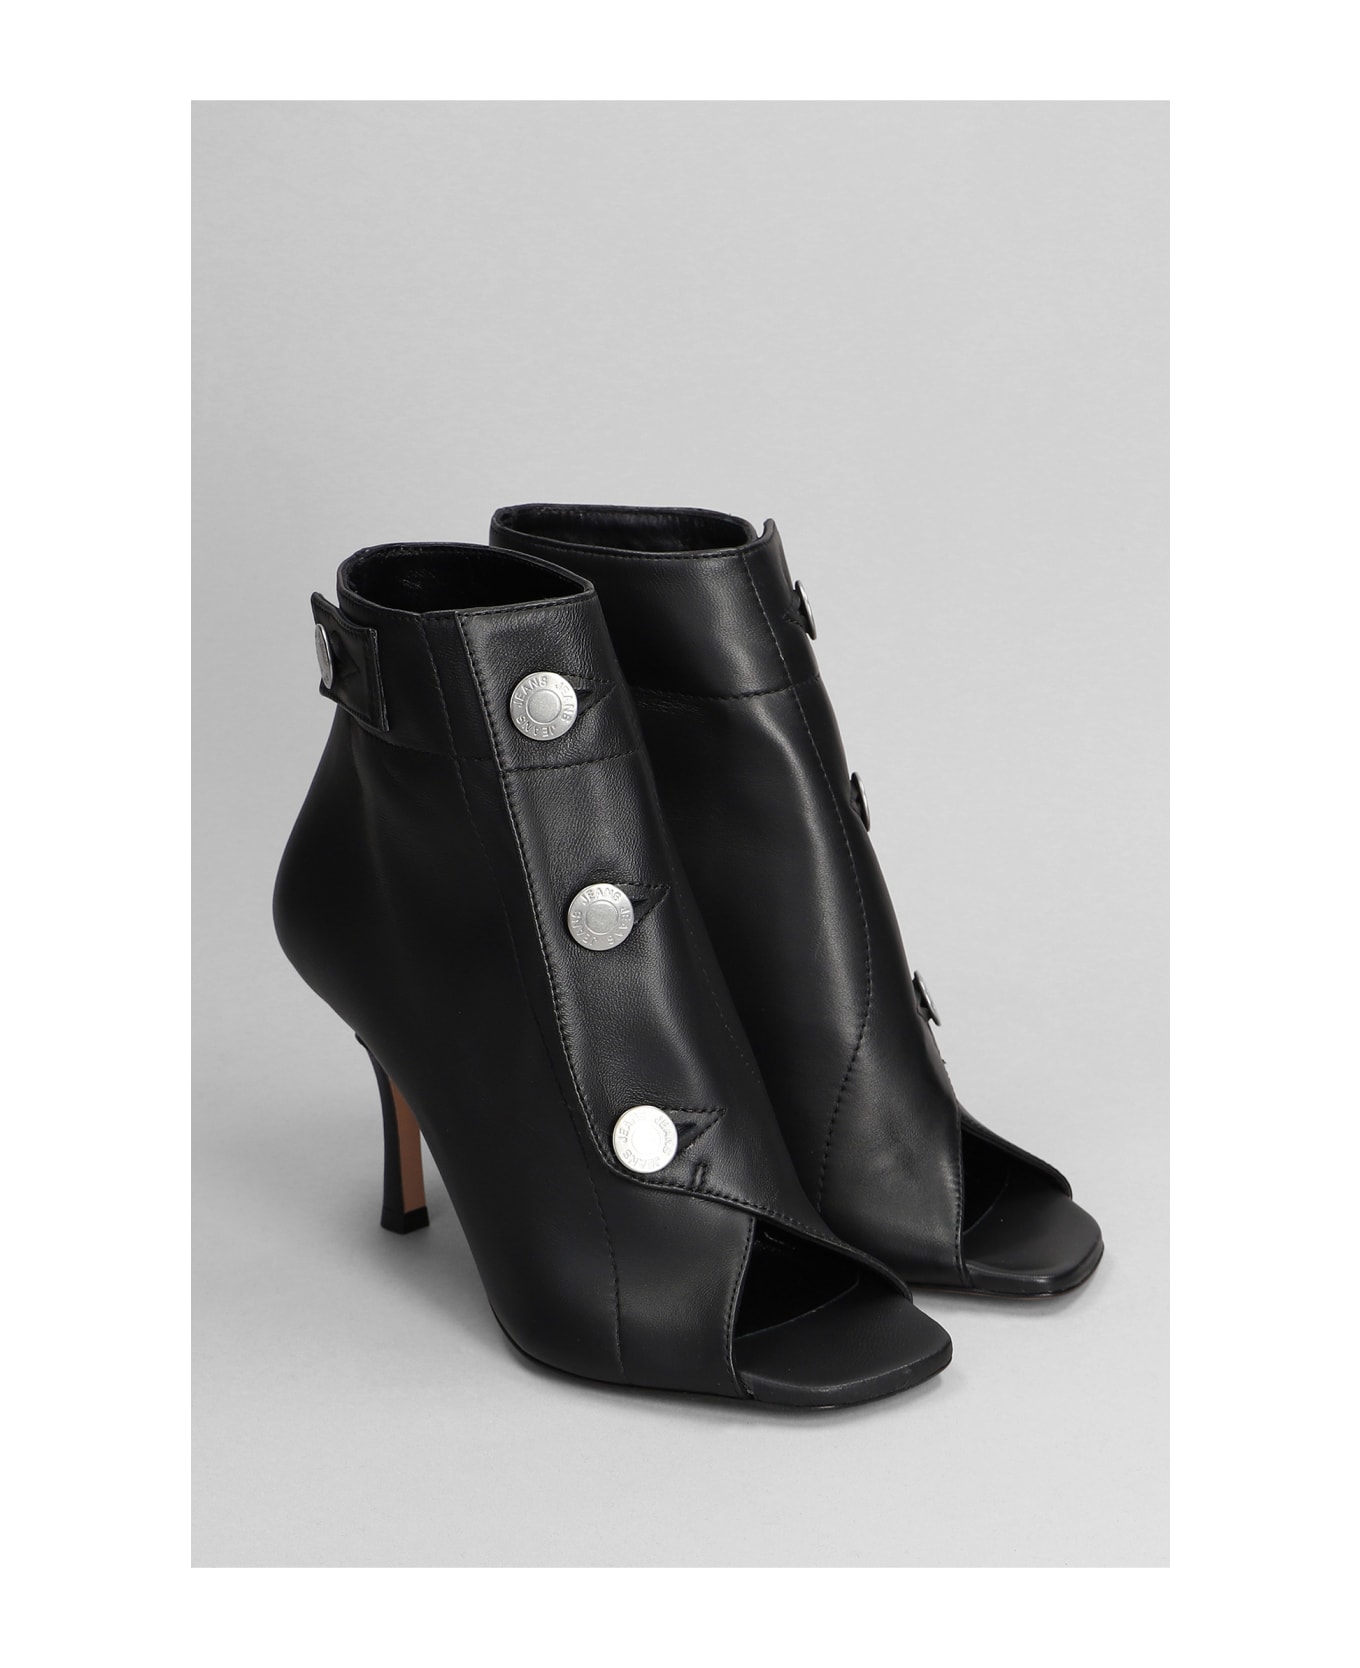 Marc Ellis High Heels Ankle Boots In Black Leather - black ブーツ